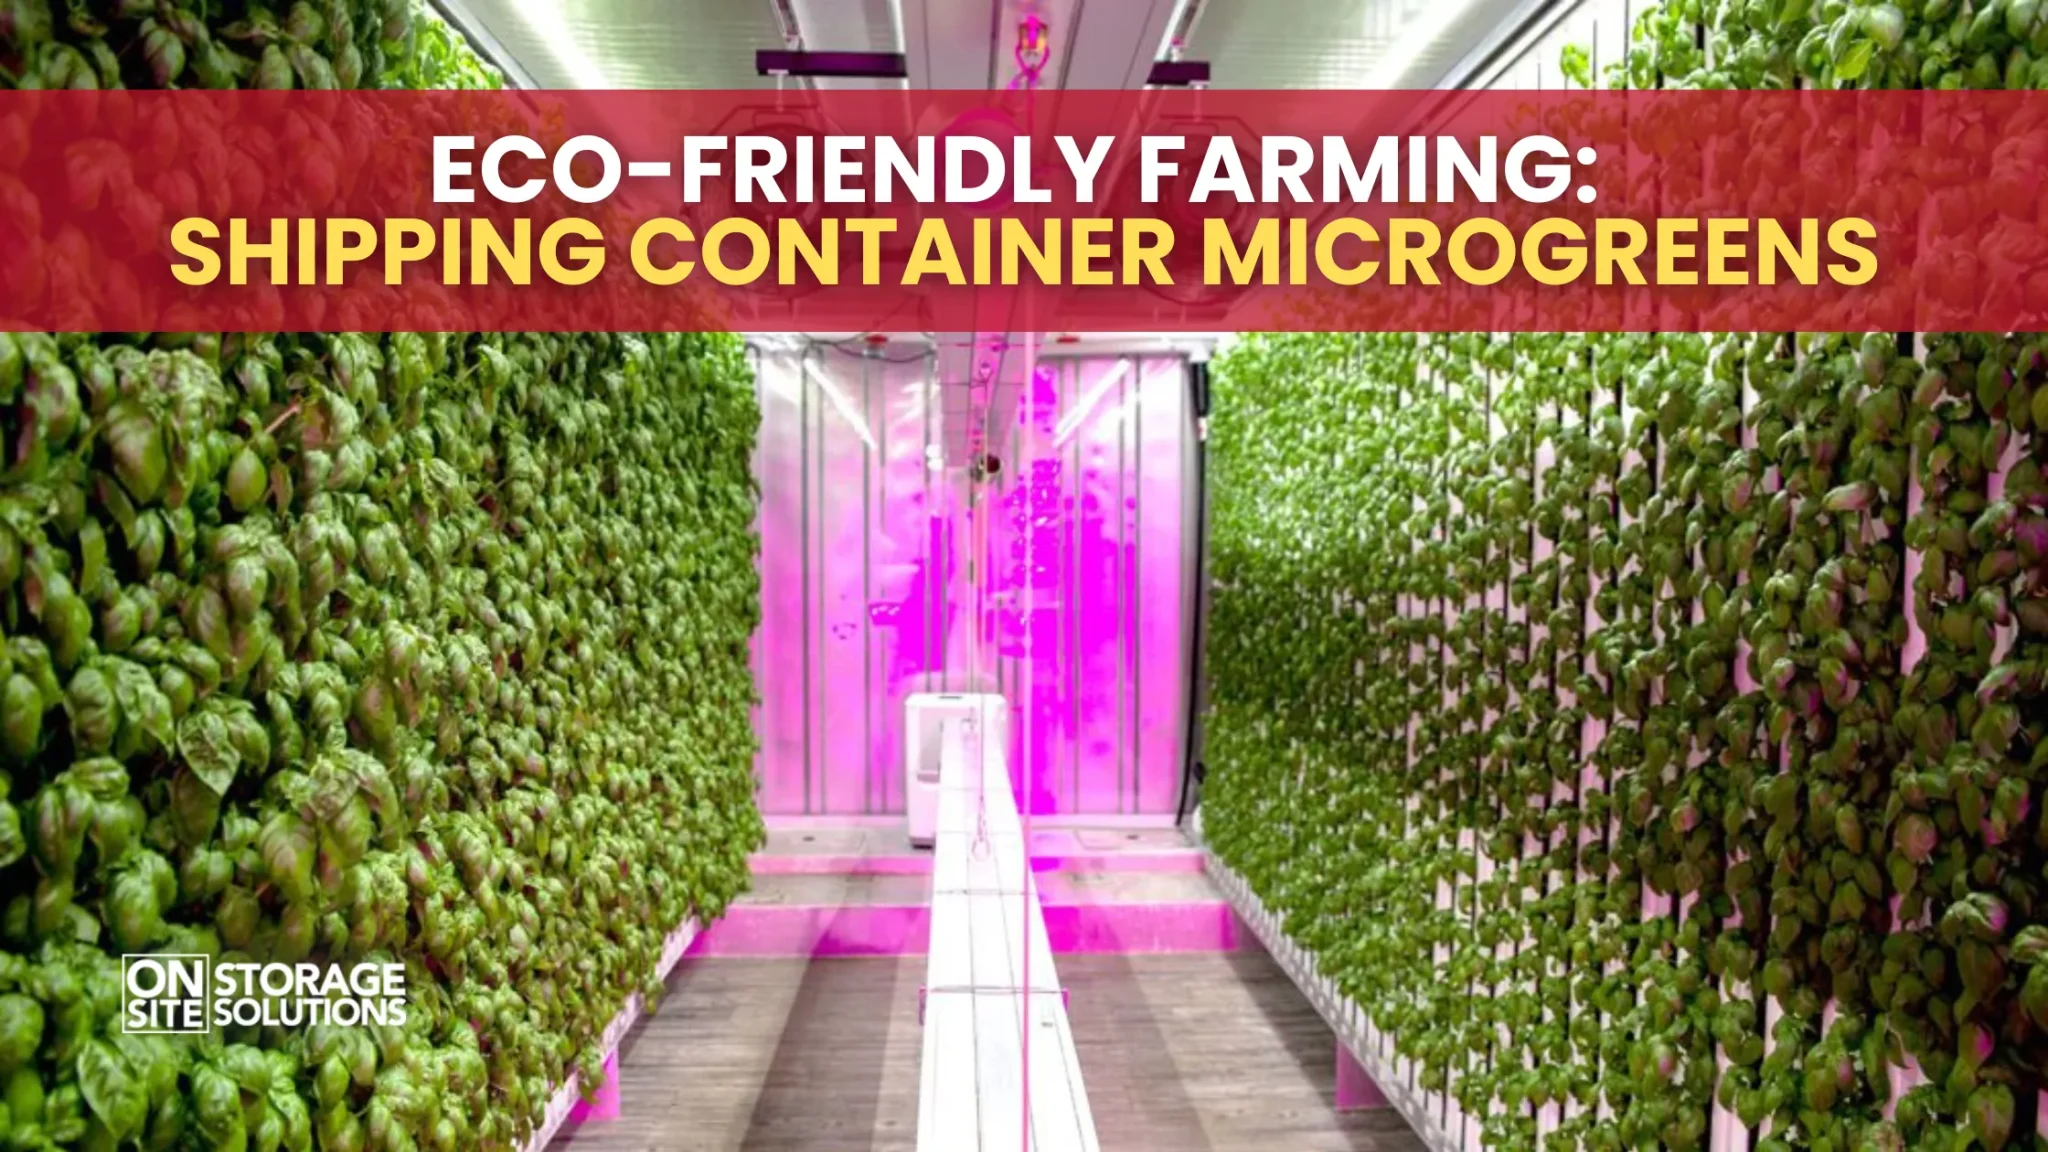 Eco-Friendly Farming: Shipping Container Microgreens